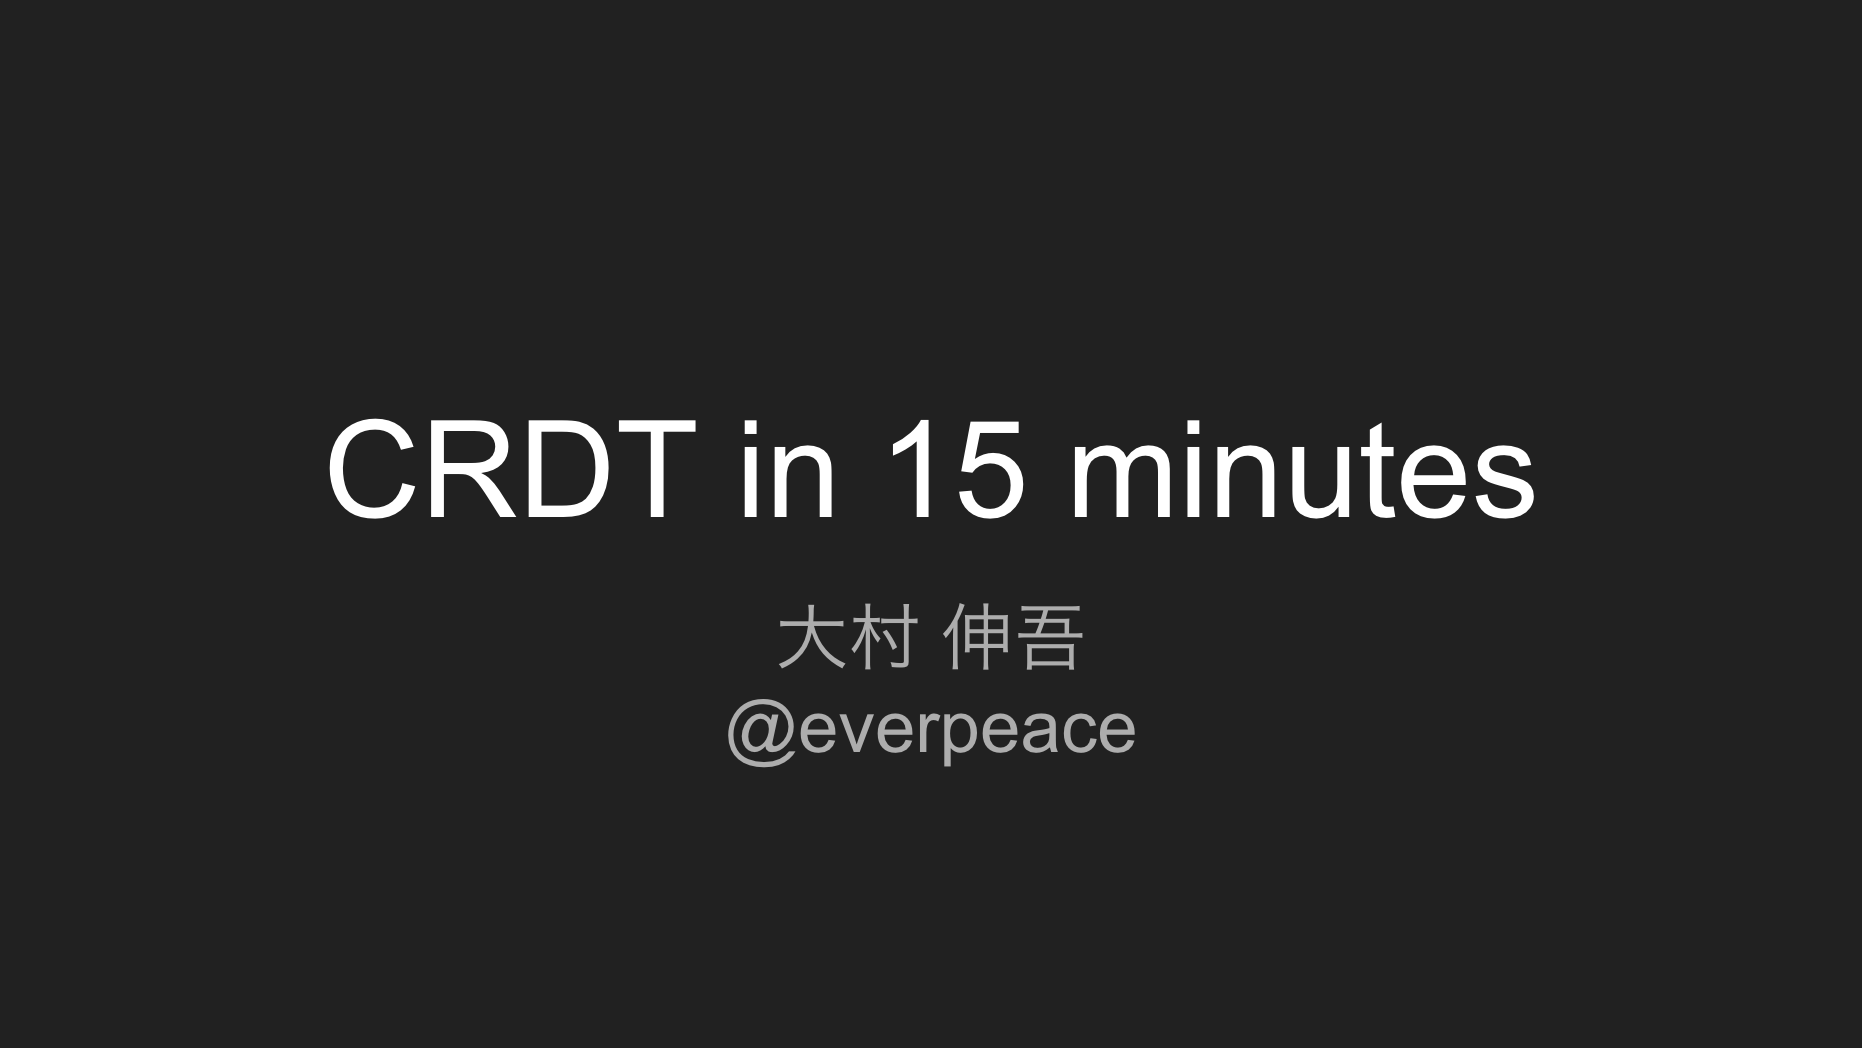 CRDT in 15 minutes